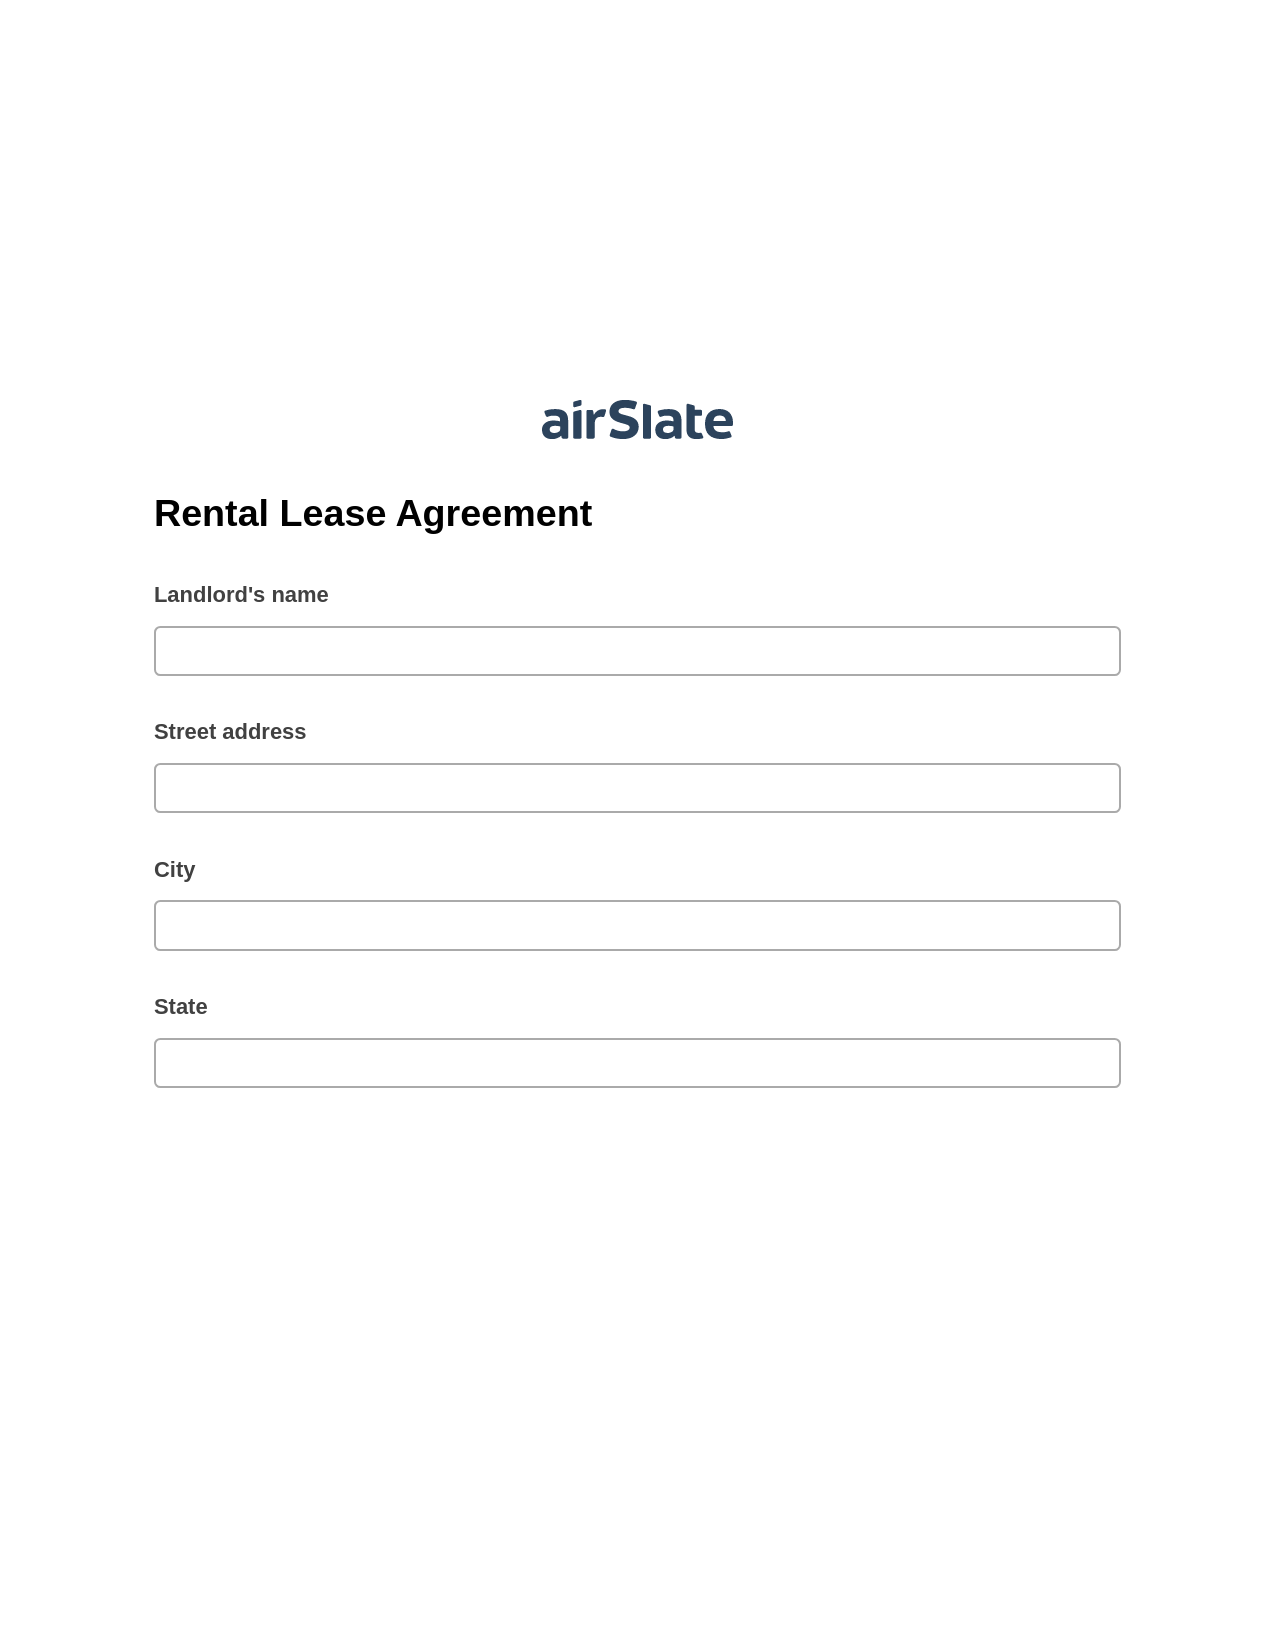 Multirole Rental Lease Agreement Pre-fill from Excel Spreadsheet Dropdown Options Bot, Remove Tags From Slate Bot, Export to Formstack Documents Bot